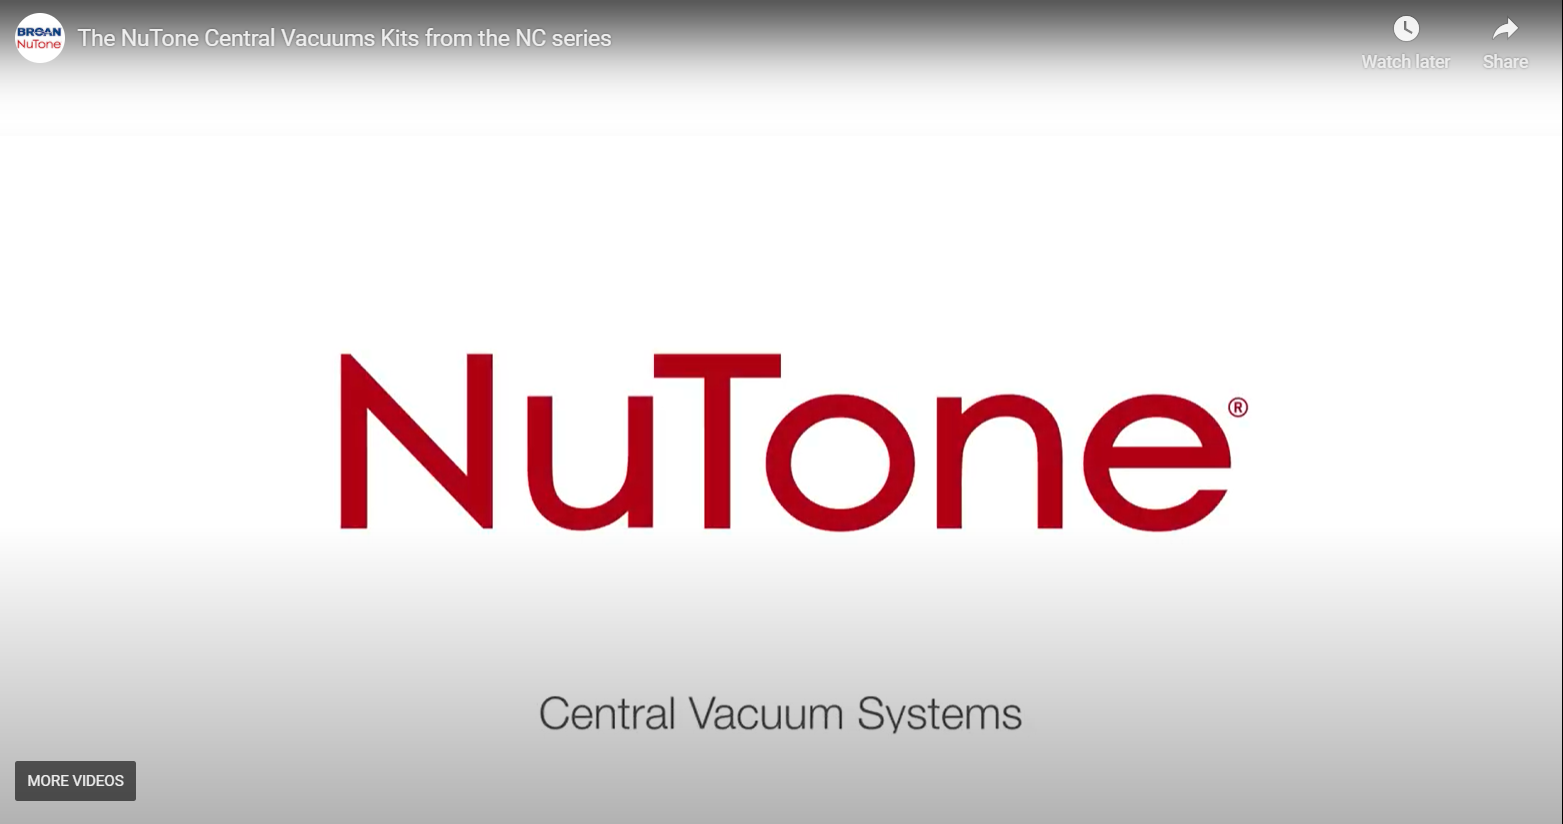 The NuTone Central Vacuums Kits from the NC series